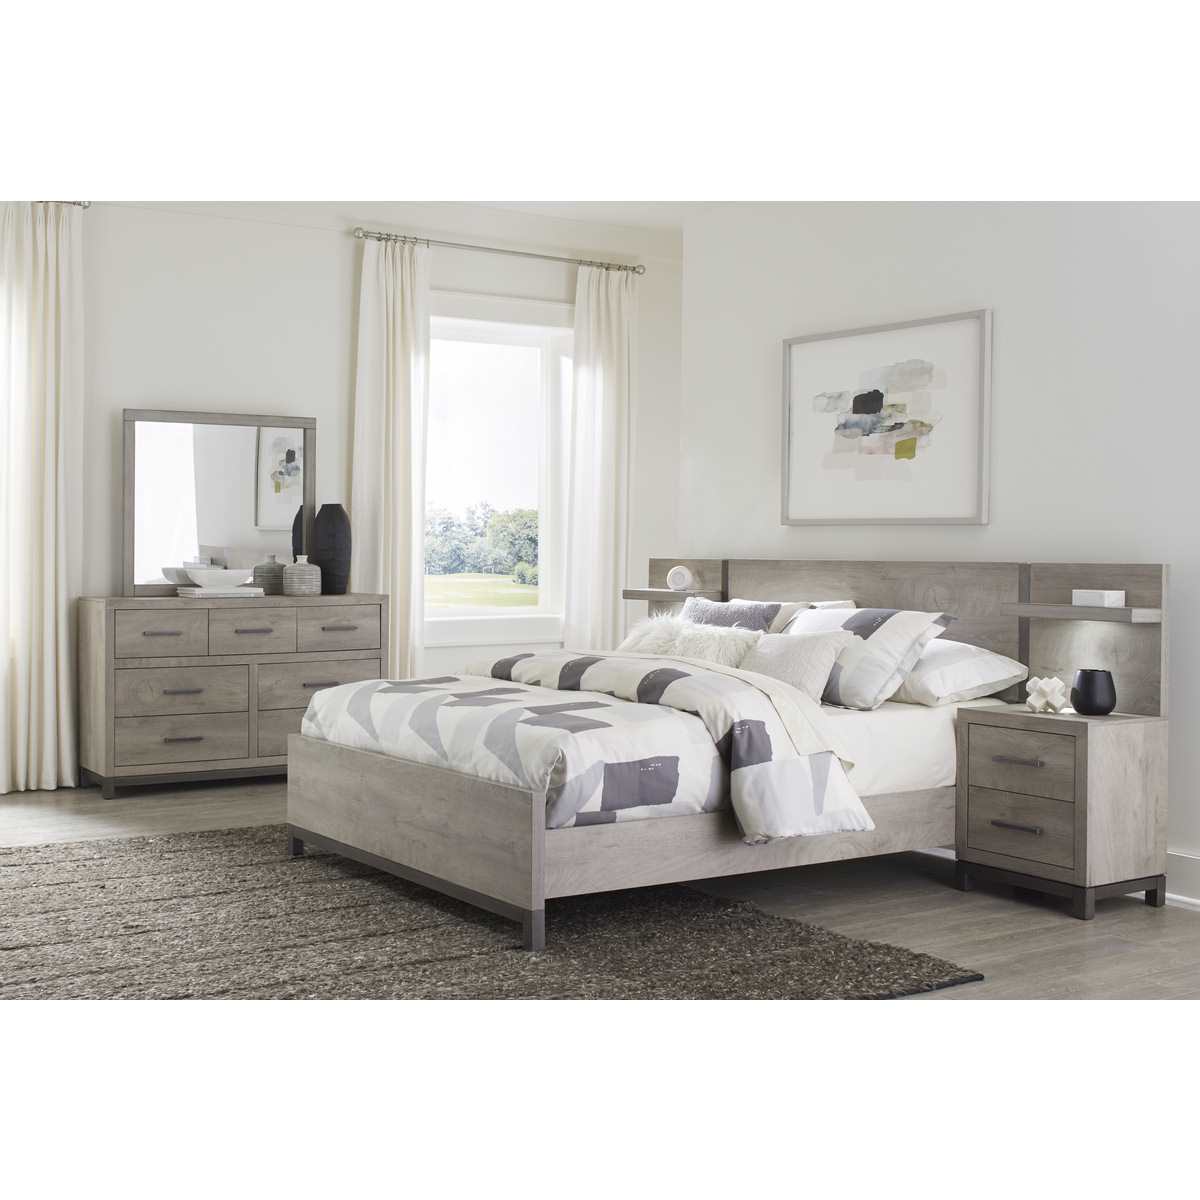 Zephyr Wall Bedroom Collection 1577